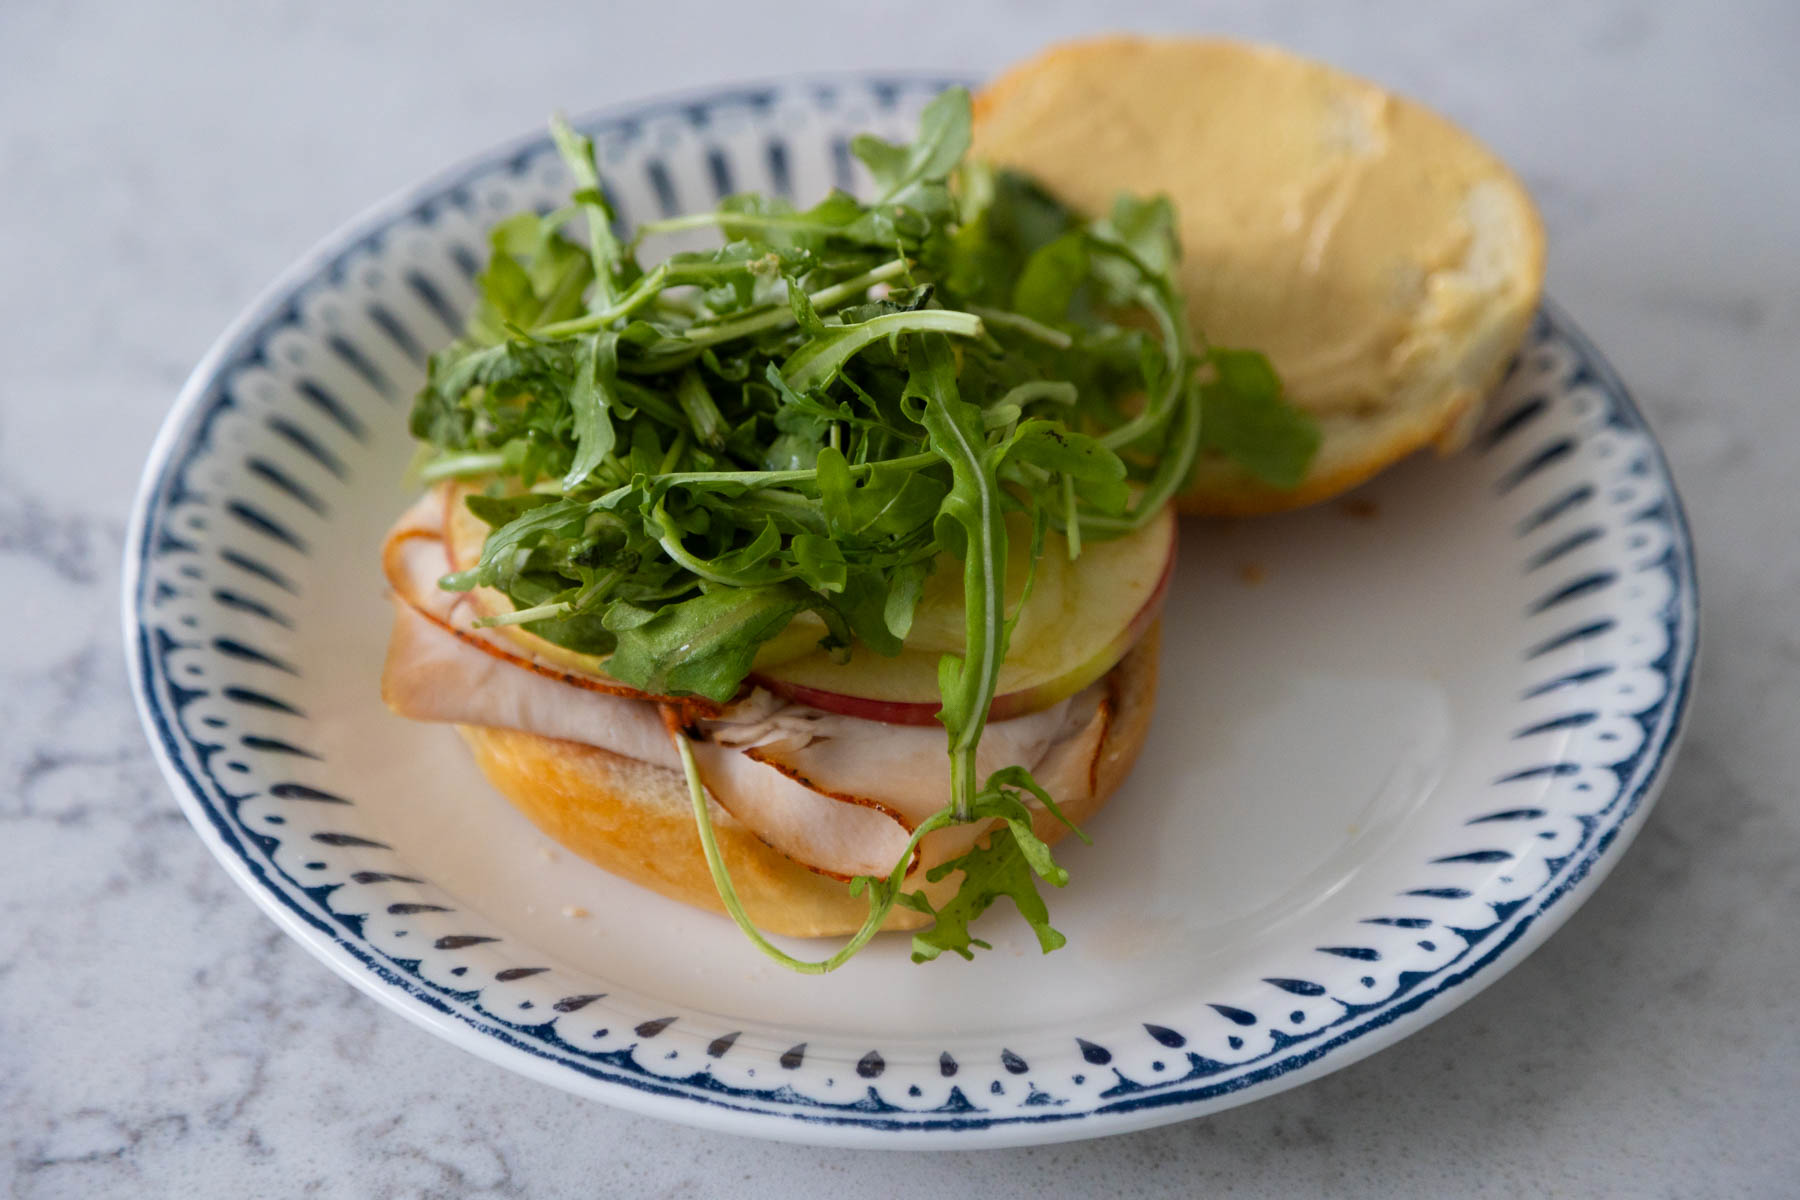 The sandwich has been spread with mustard and topped with arugula.